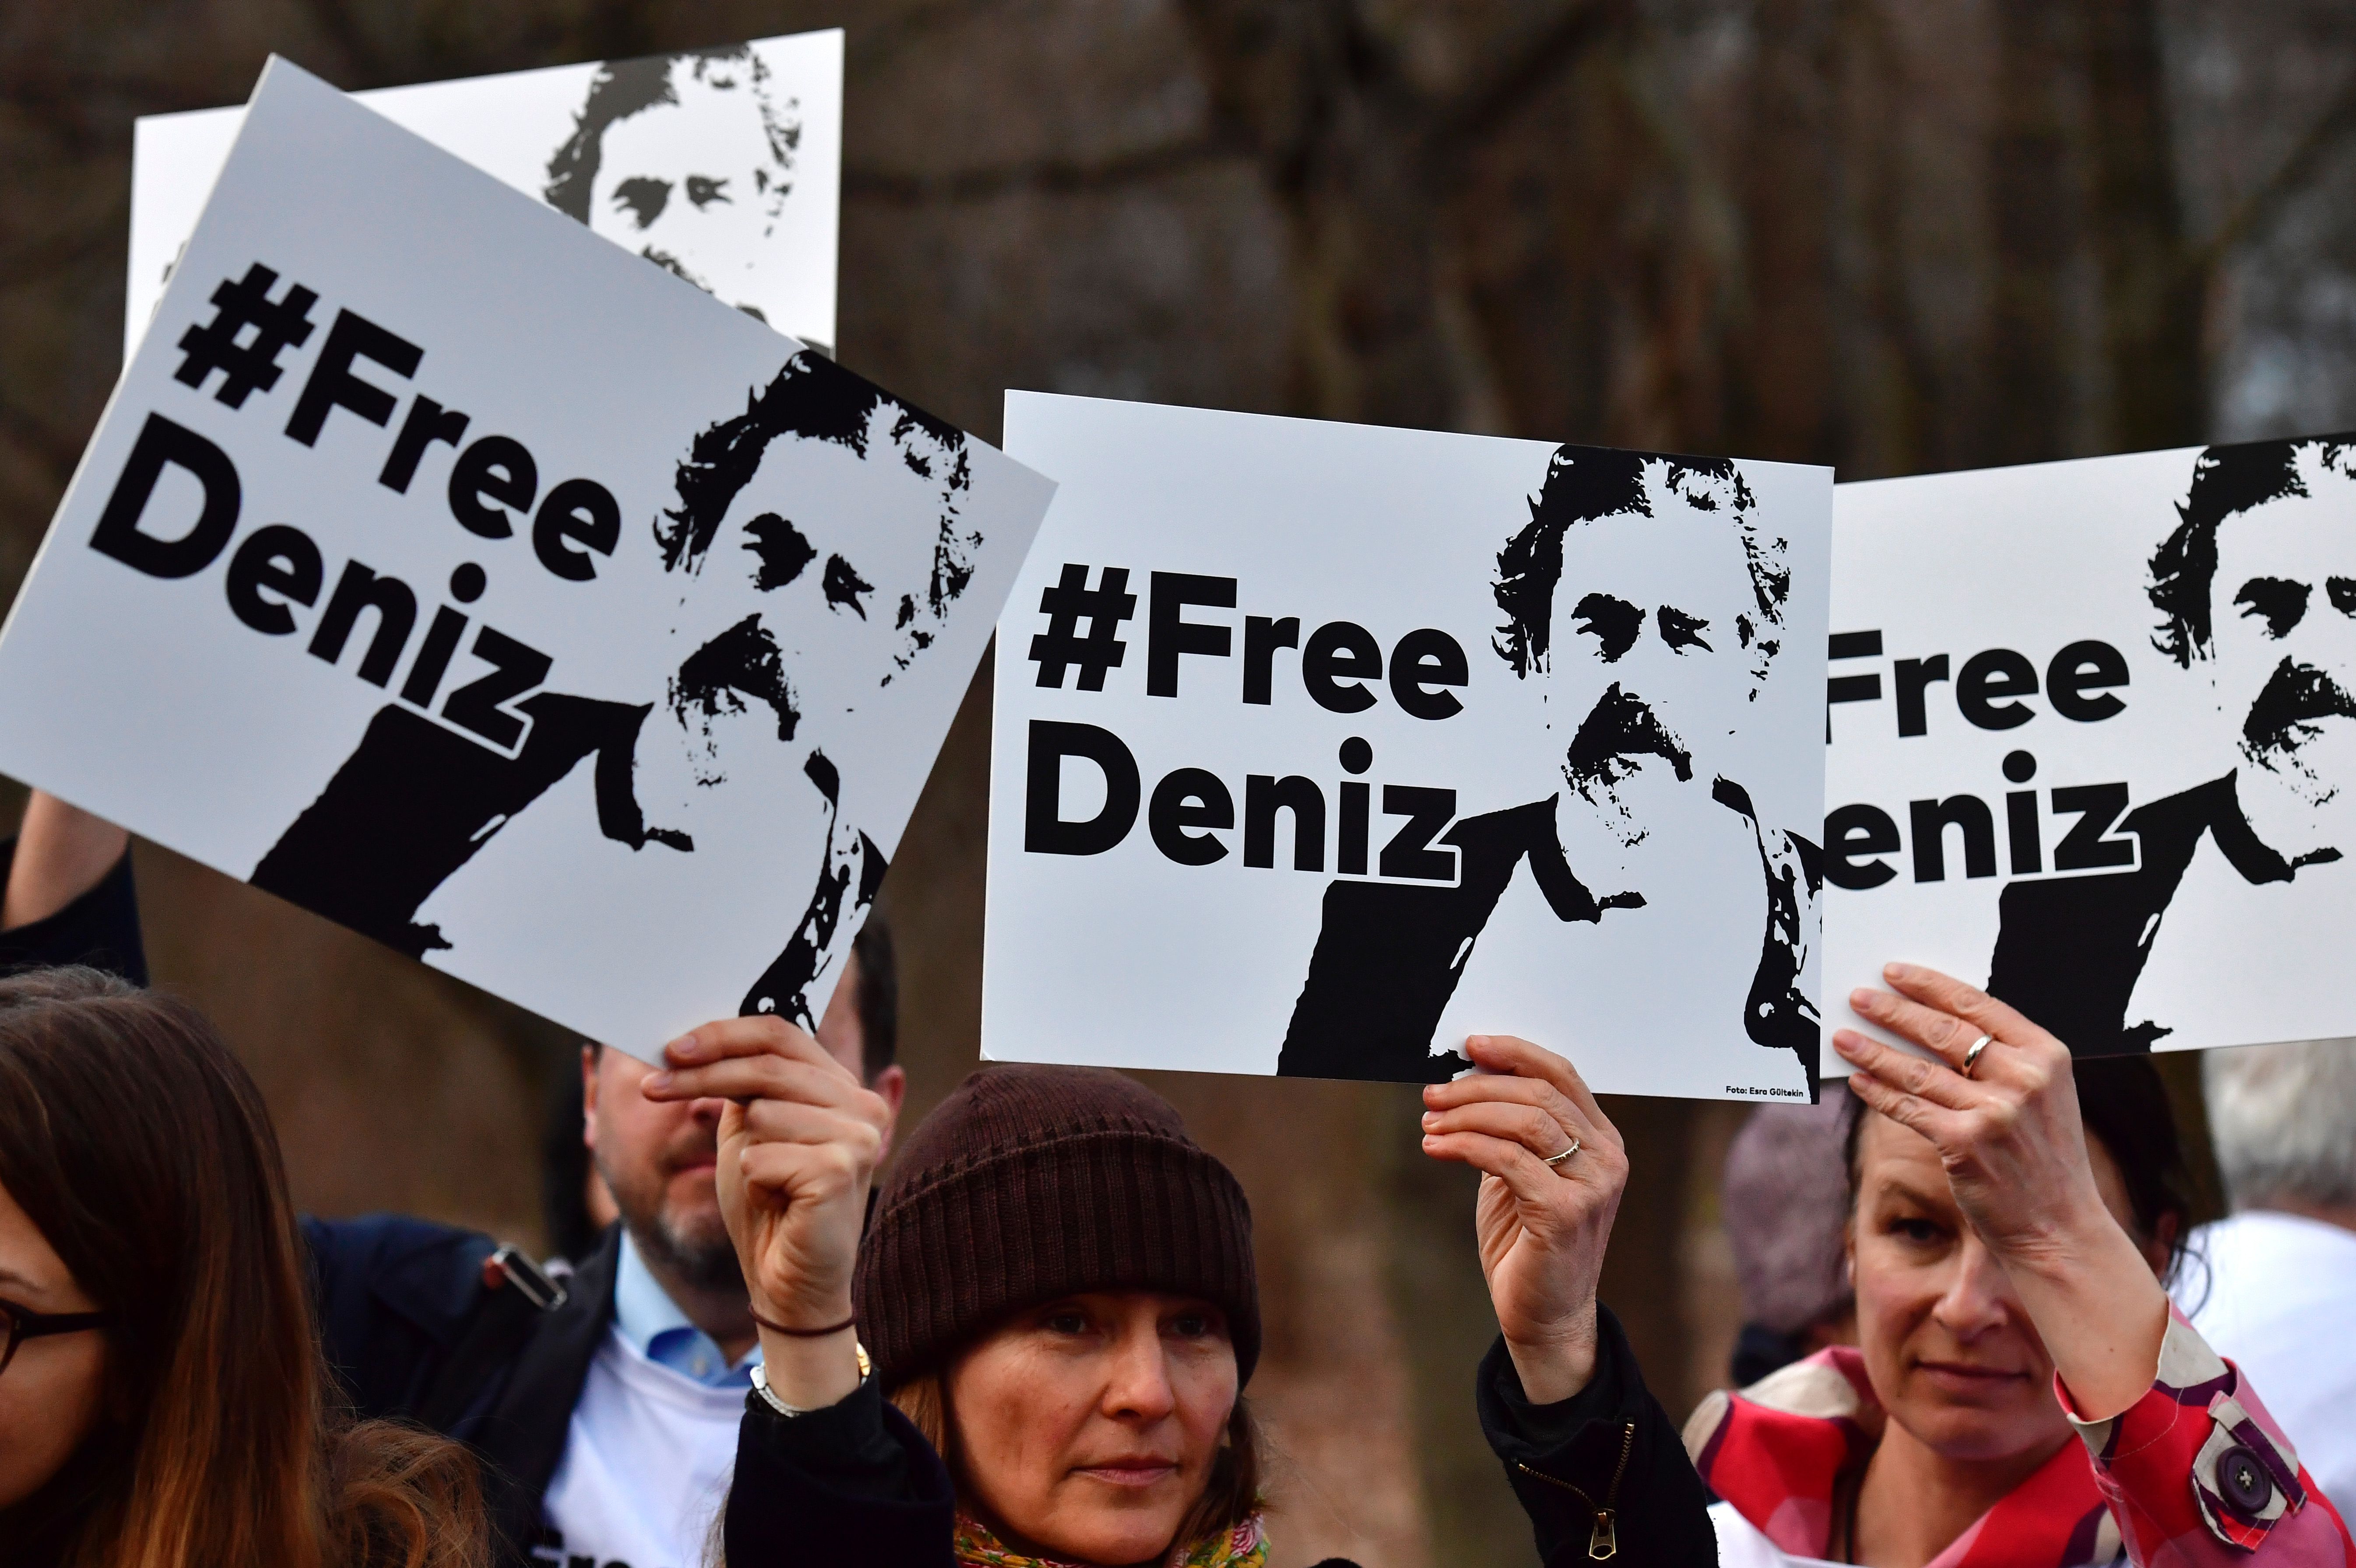 People hold placards with hashtag #FREEDENIZ to protest the detantion of German journalist Deniz Yucel in front of Turkish embassy in Berlin on February 28, 2017. 
The investigative detention against Yuecel in Turkey has sparked indignation in the government, parties, and journalist associations in Germany. Yucel, 43, was detained on February 18 and his apartment searched in connection with news reports on an attack by hackers on the email account of Turkey's energy minister. Yucel originates from Floersheim. / AFP / John MACDOUGALL        (Photo credit should read JOHN MACDOUGALL/AFP/Getty Images)